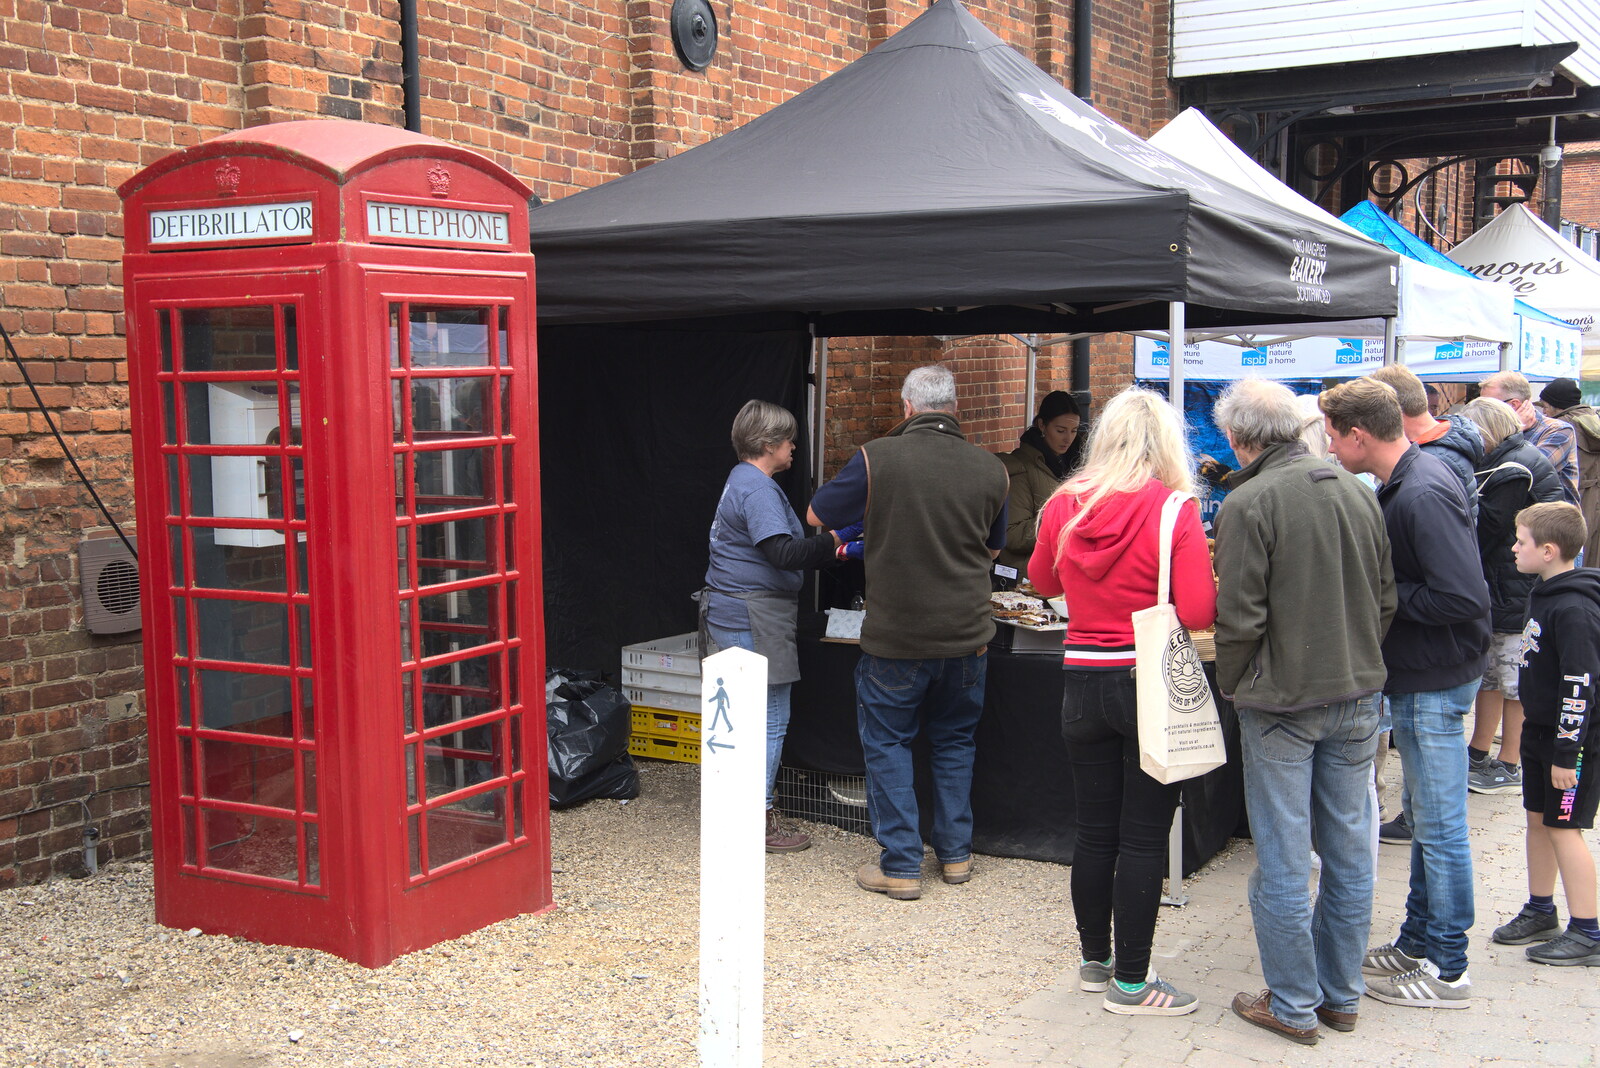 A K6 phone box at Snape Maltings from The Aldeburgh Food Festival, Snape Maltings, Suffolk - 25th September 2022